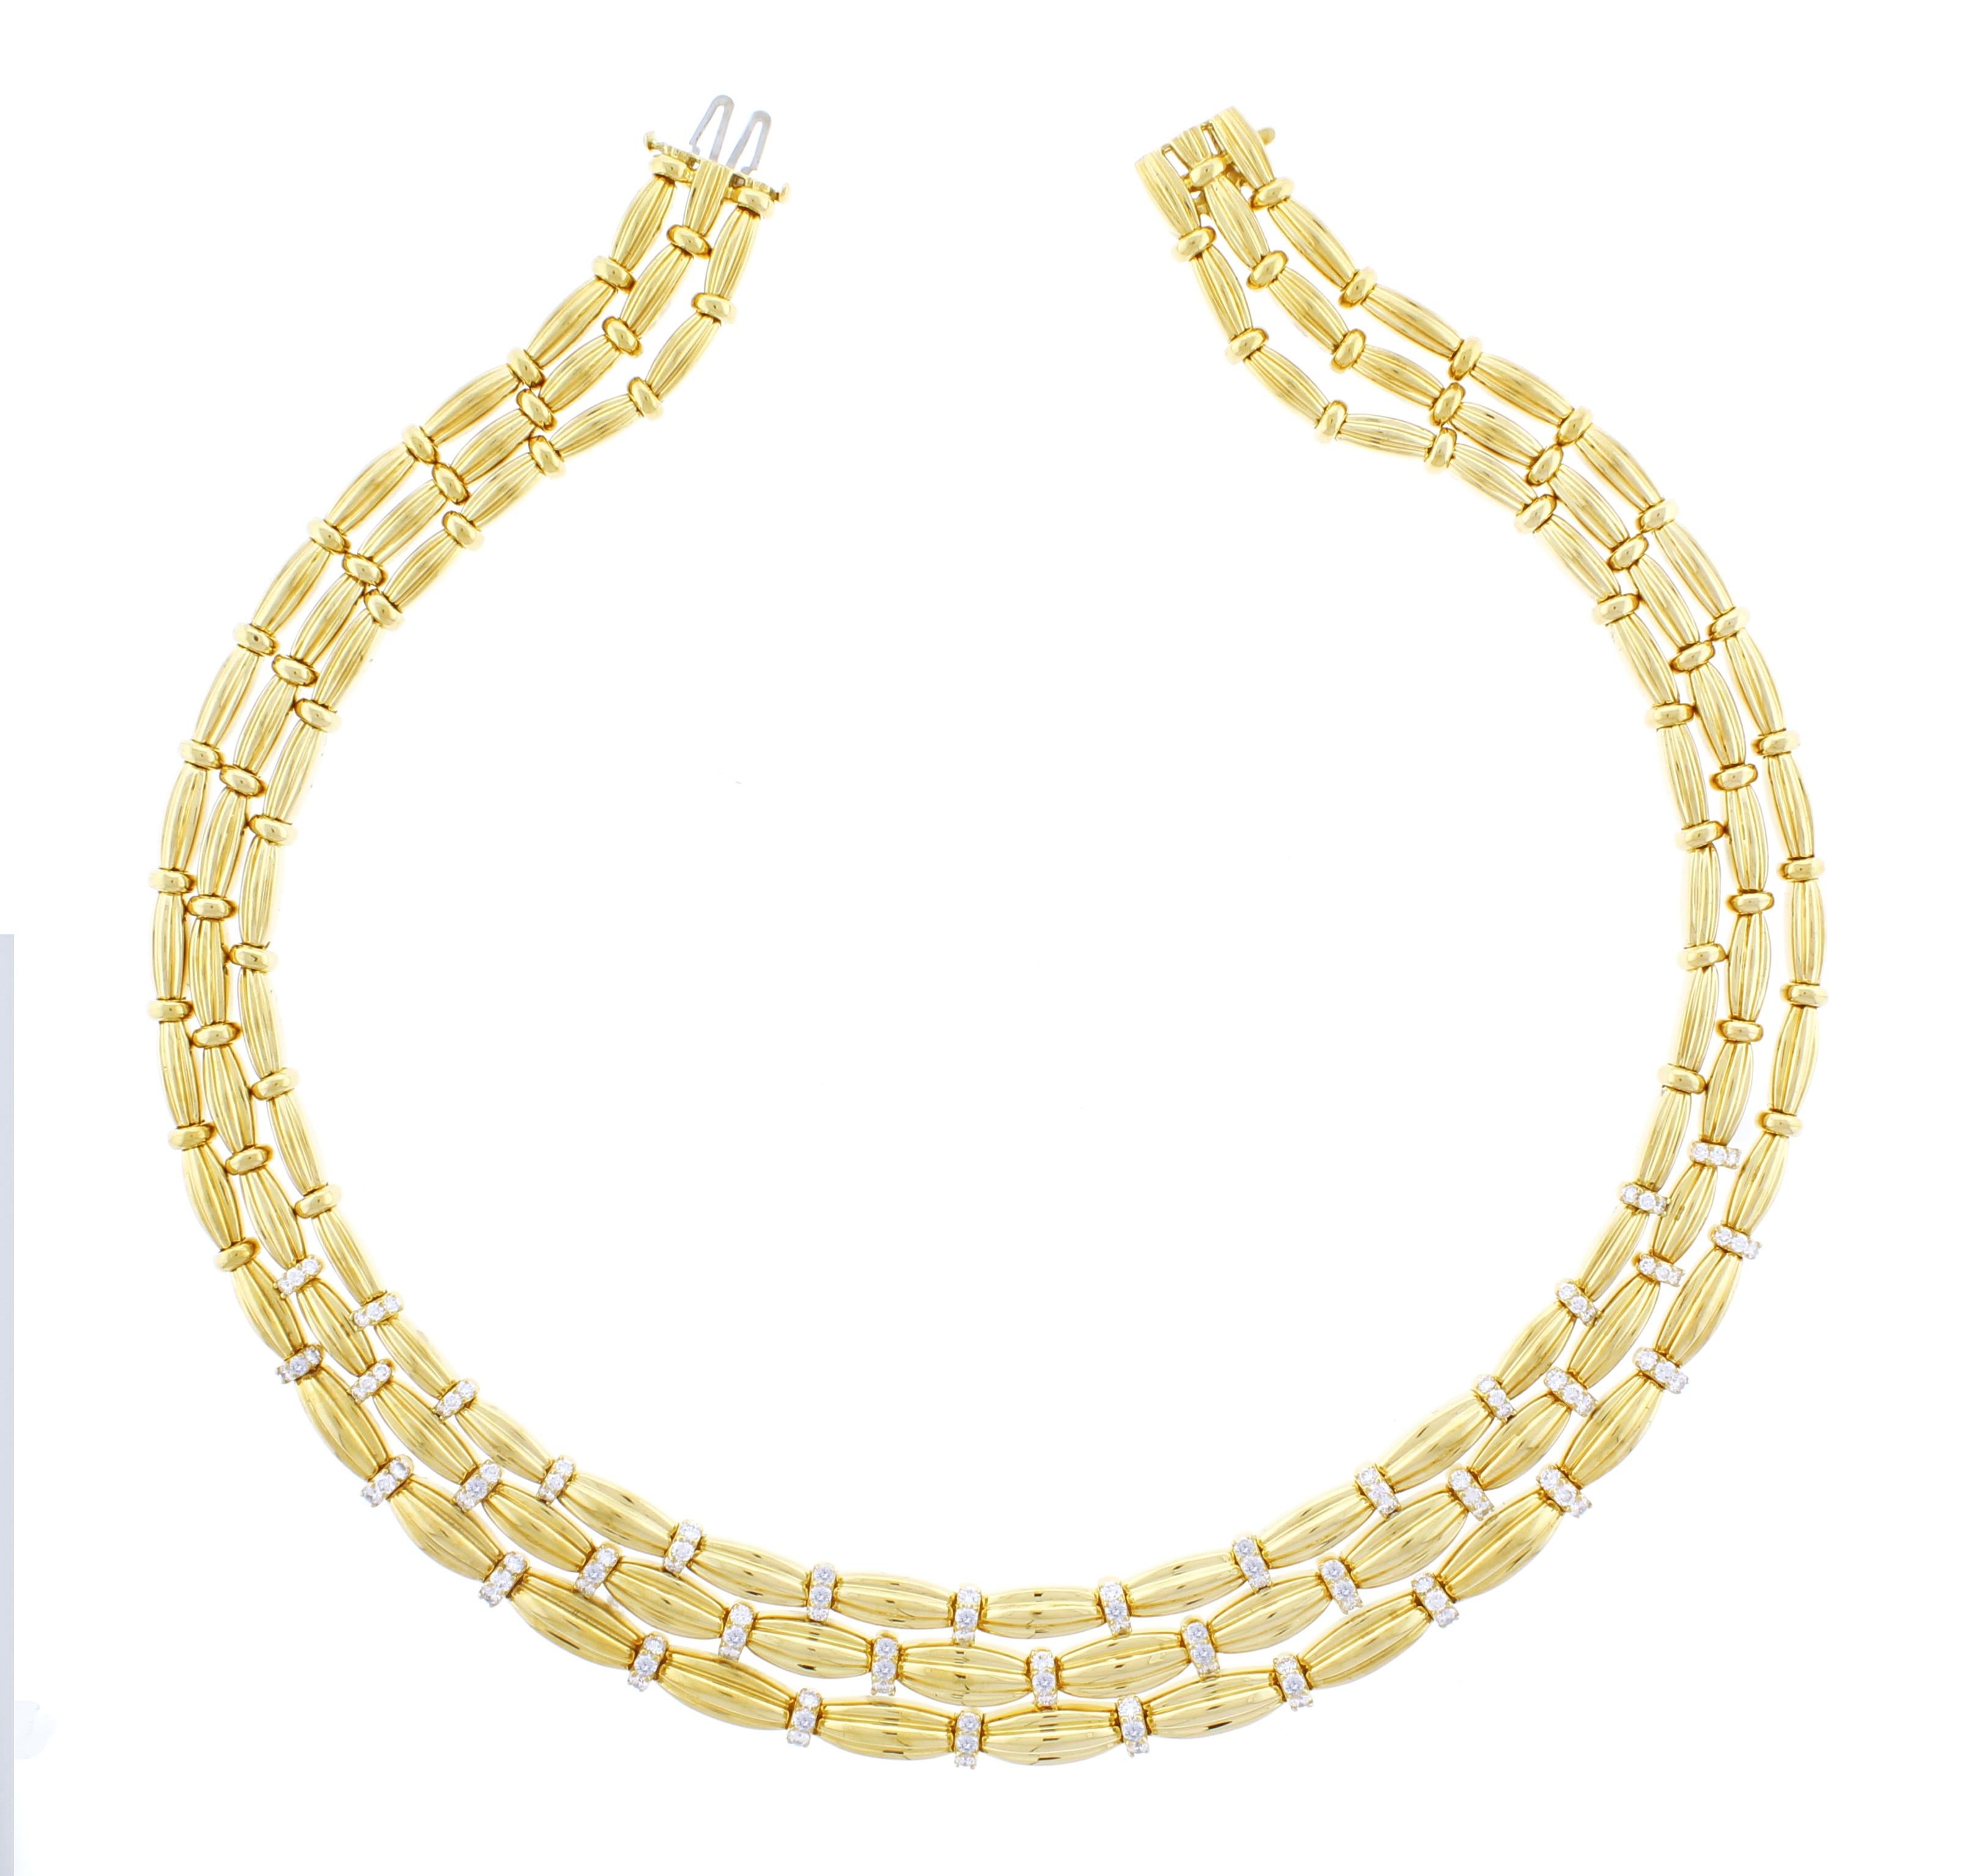 From Tiffany & Co. A three strand gold necklace with diamonds. The necklace is specially designed to fallow the contour of the neck, offering a perfect fit
♦ Designer: Tiffany
♦ Metal: 18 karat
♦ 90 Diamonds= 4.50 carats F-G VVS
♦ Circa 1992
♦  139